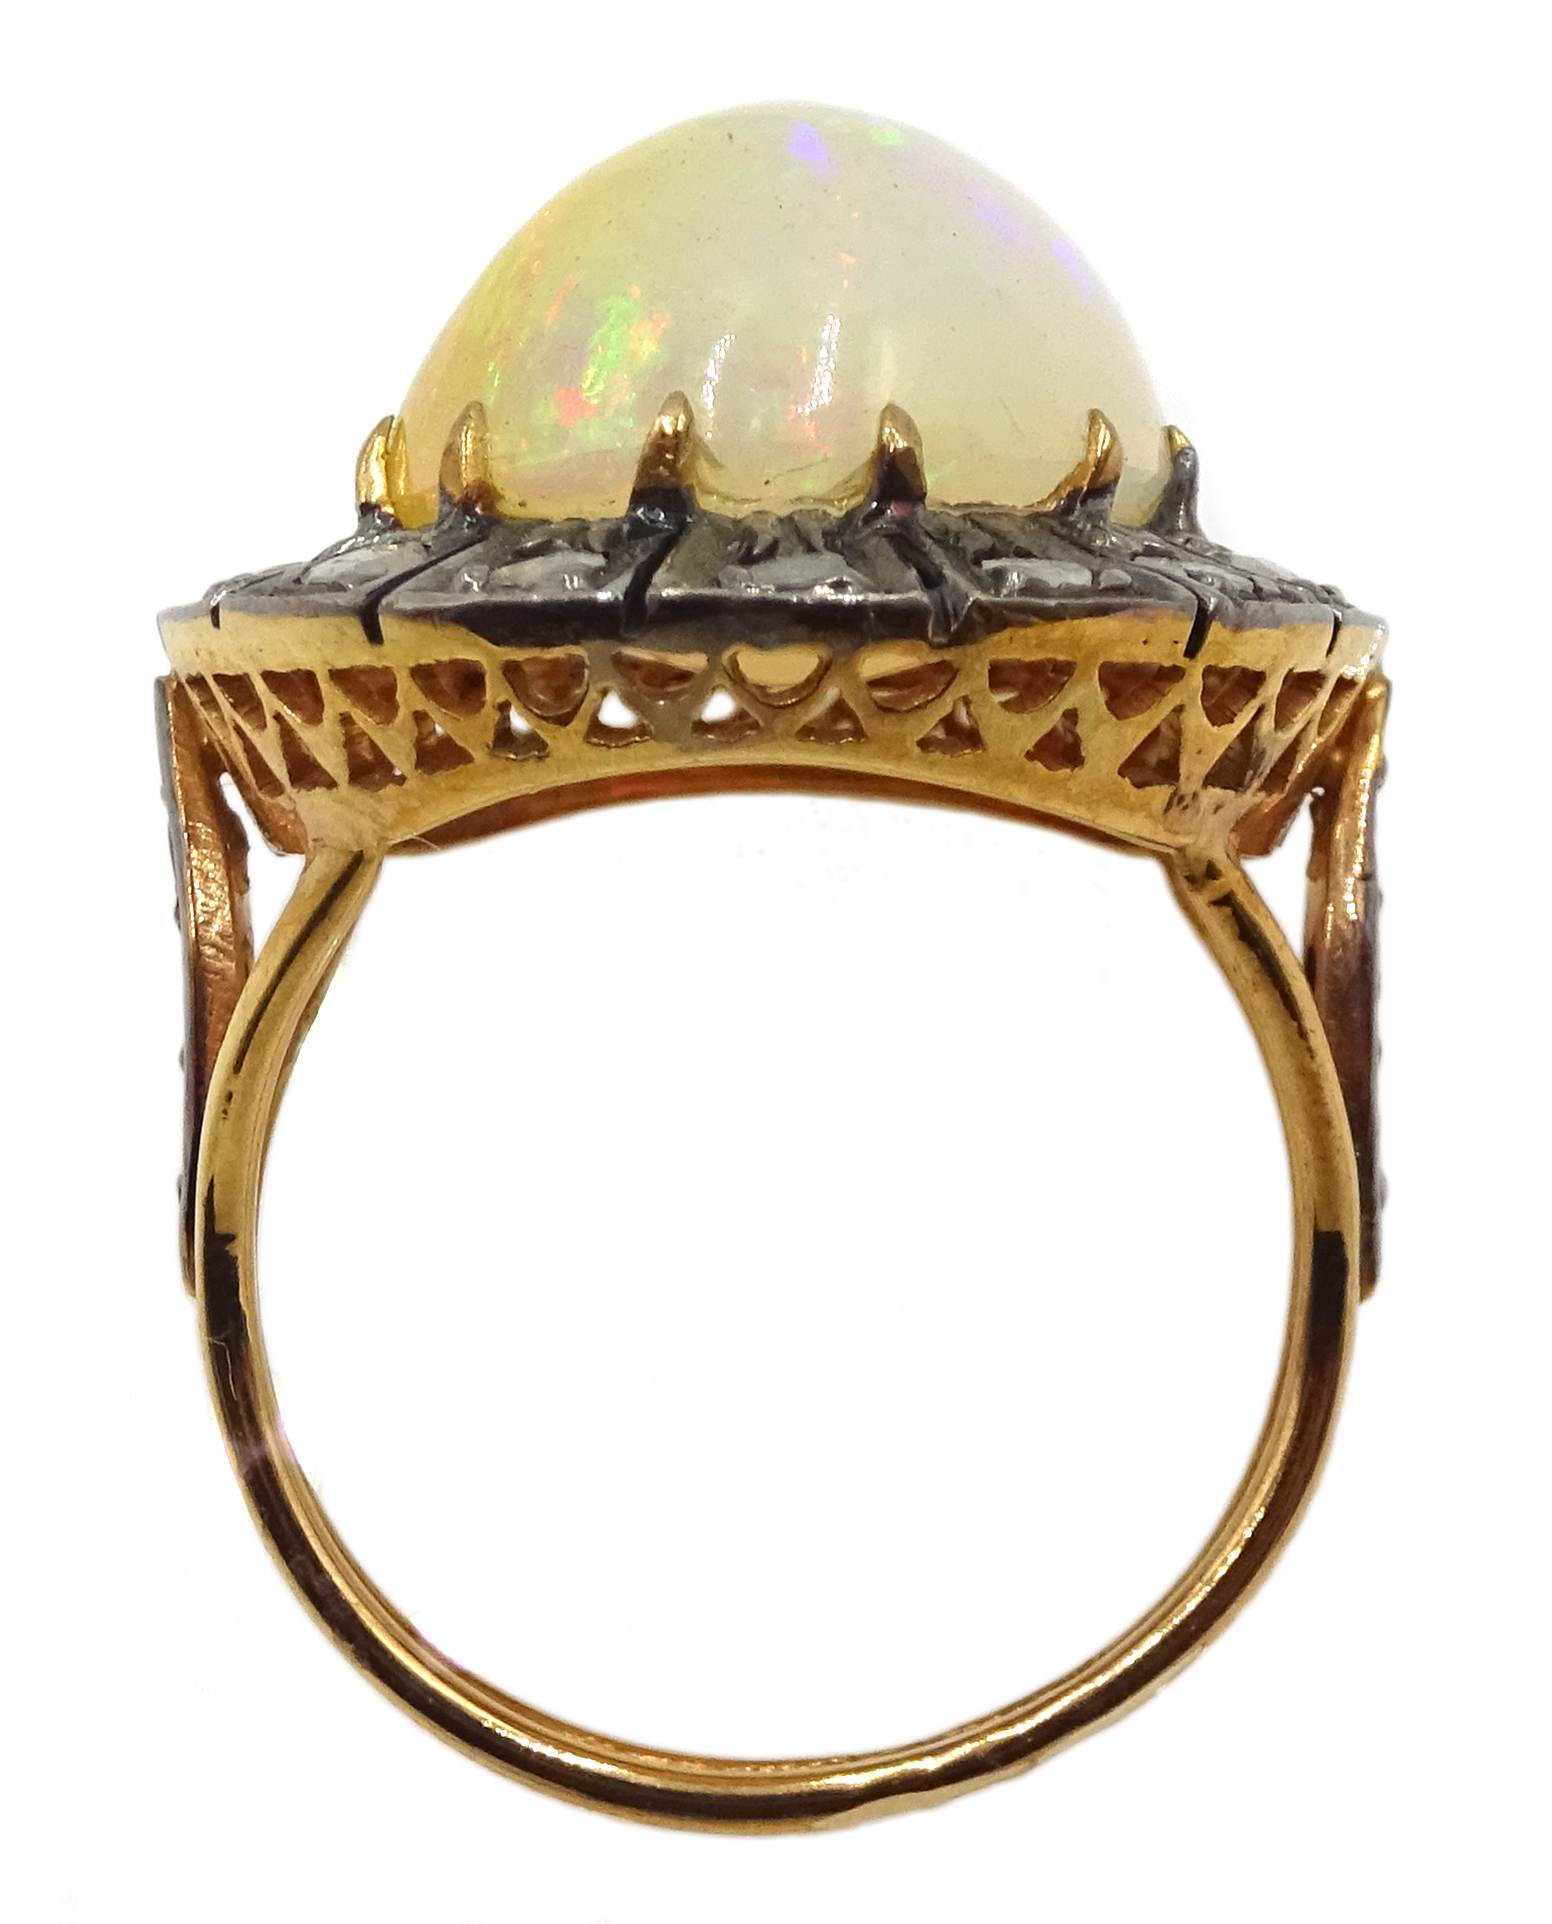 14ct gold and silver cabochon Ethiopian opal and rose cit diamond ring - Image 6 of 7